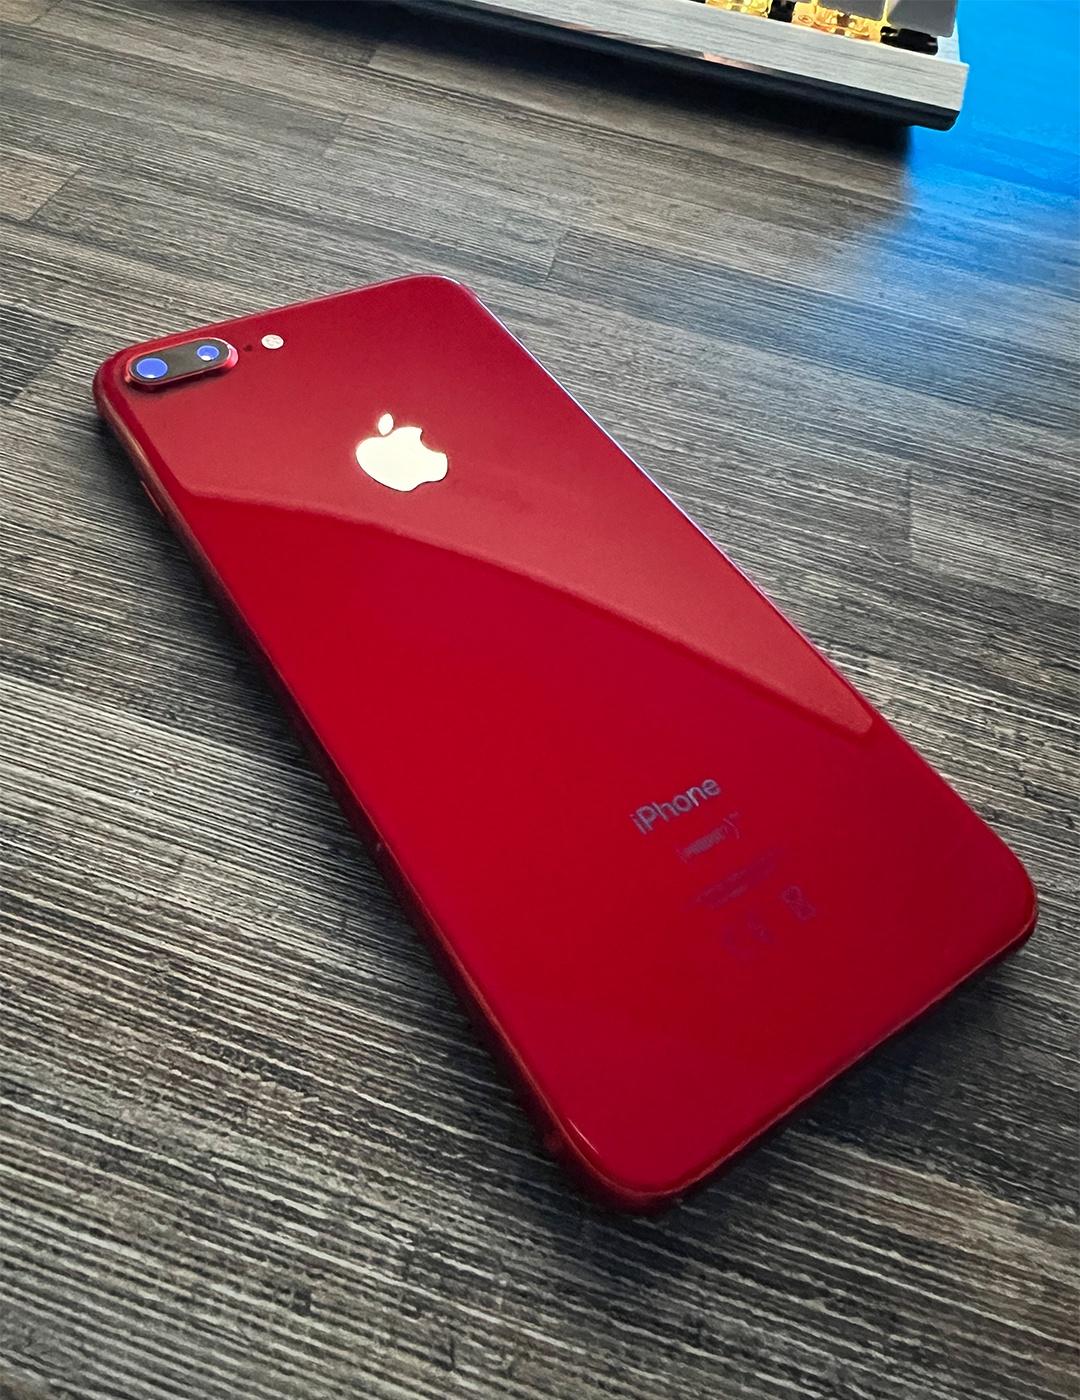 Apple introduces iPhone 8 and iPhone 8 Plus (PRODUCT)RED Special Edition -  Apple